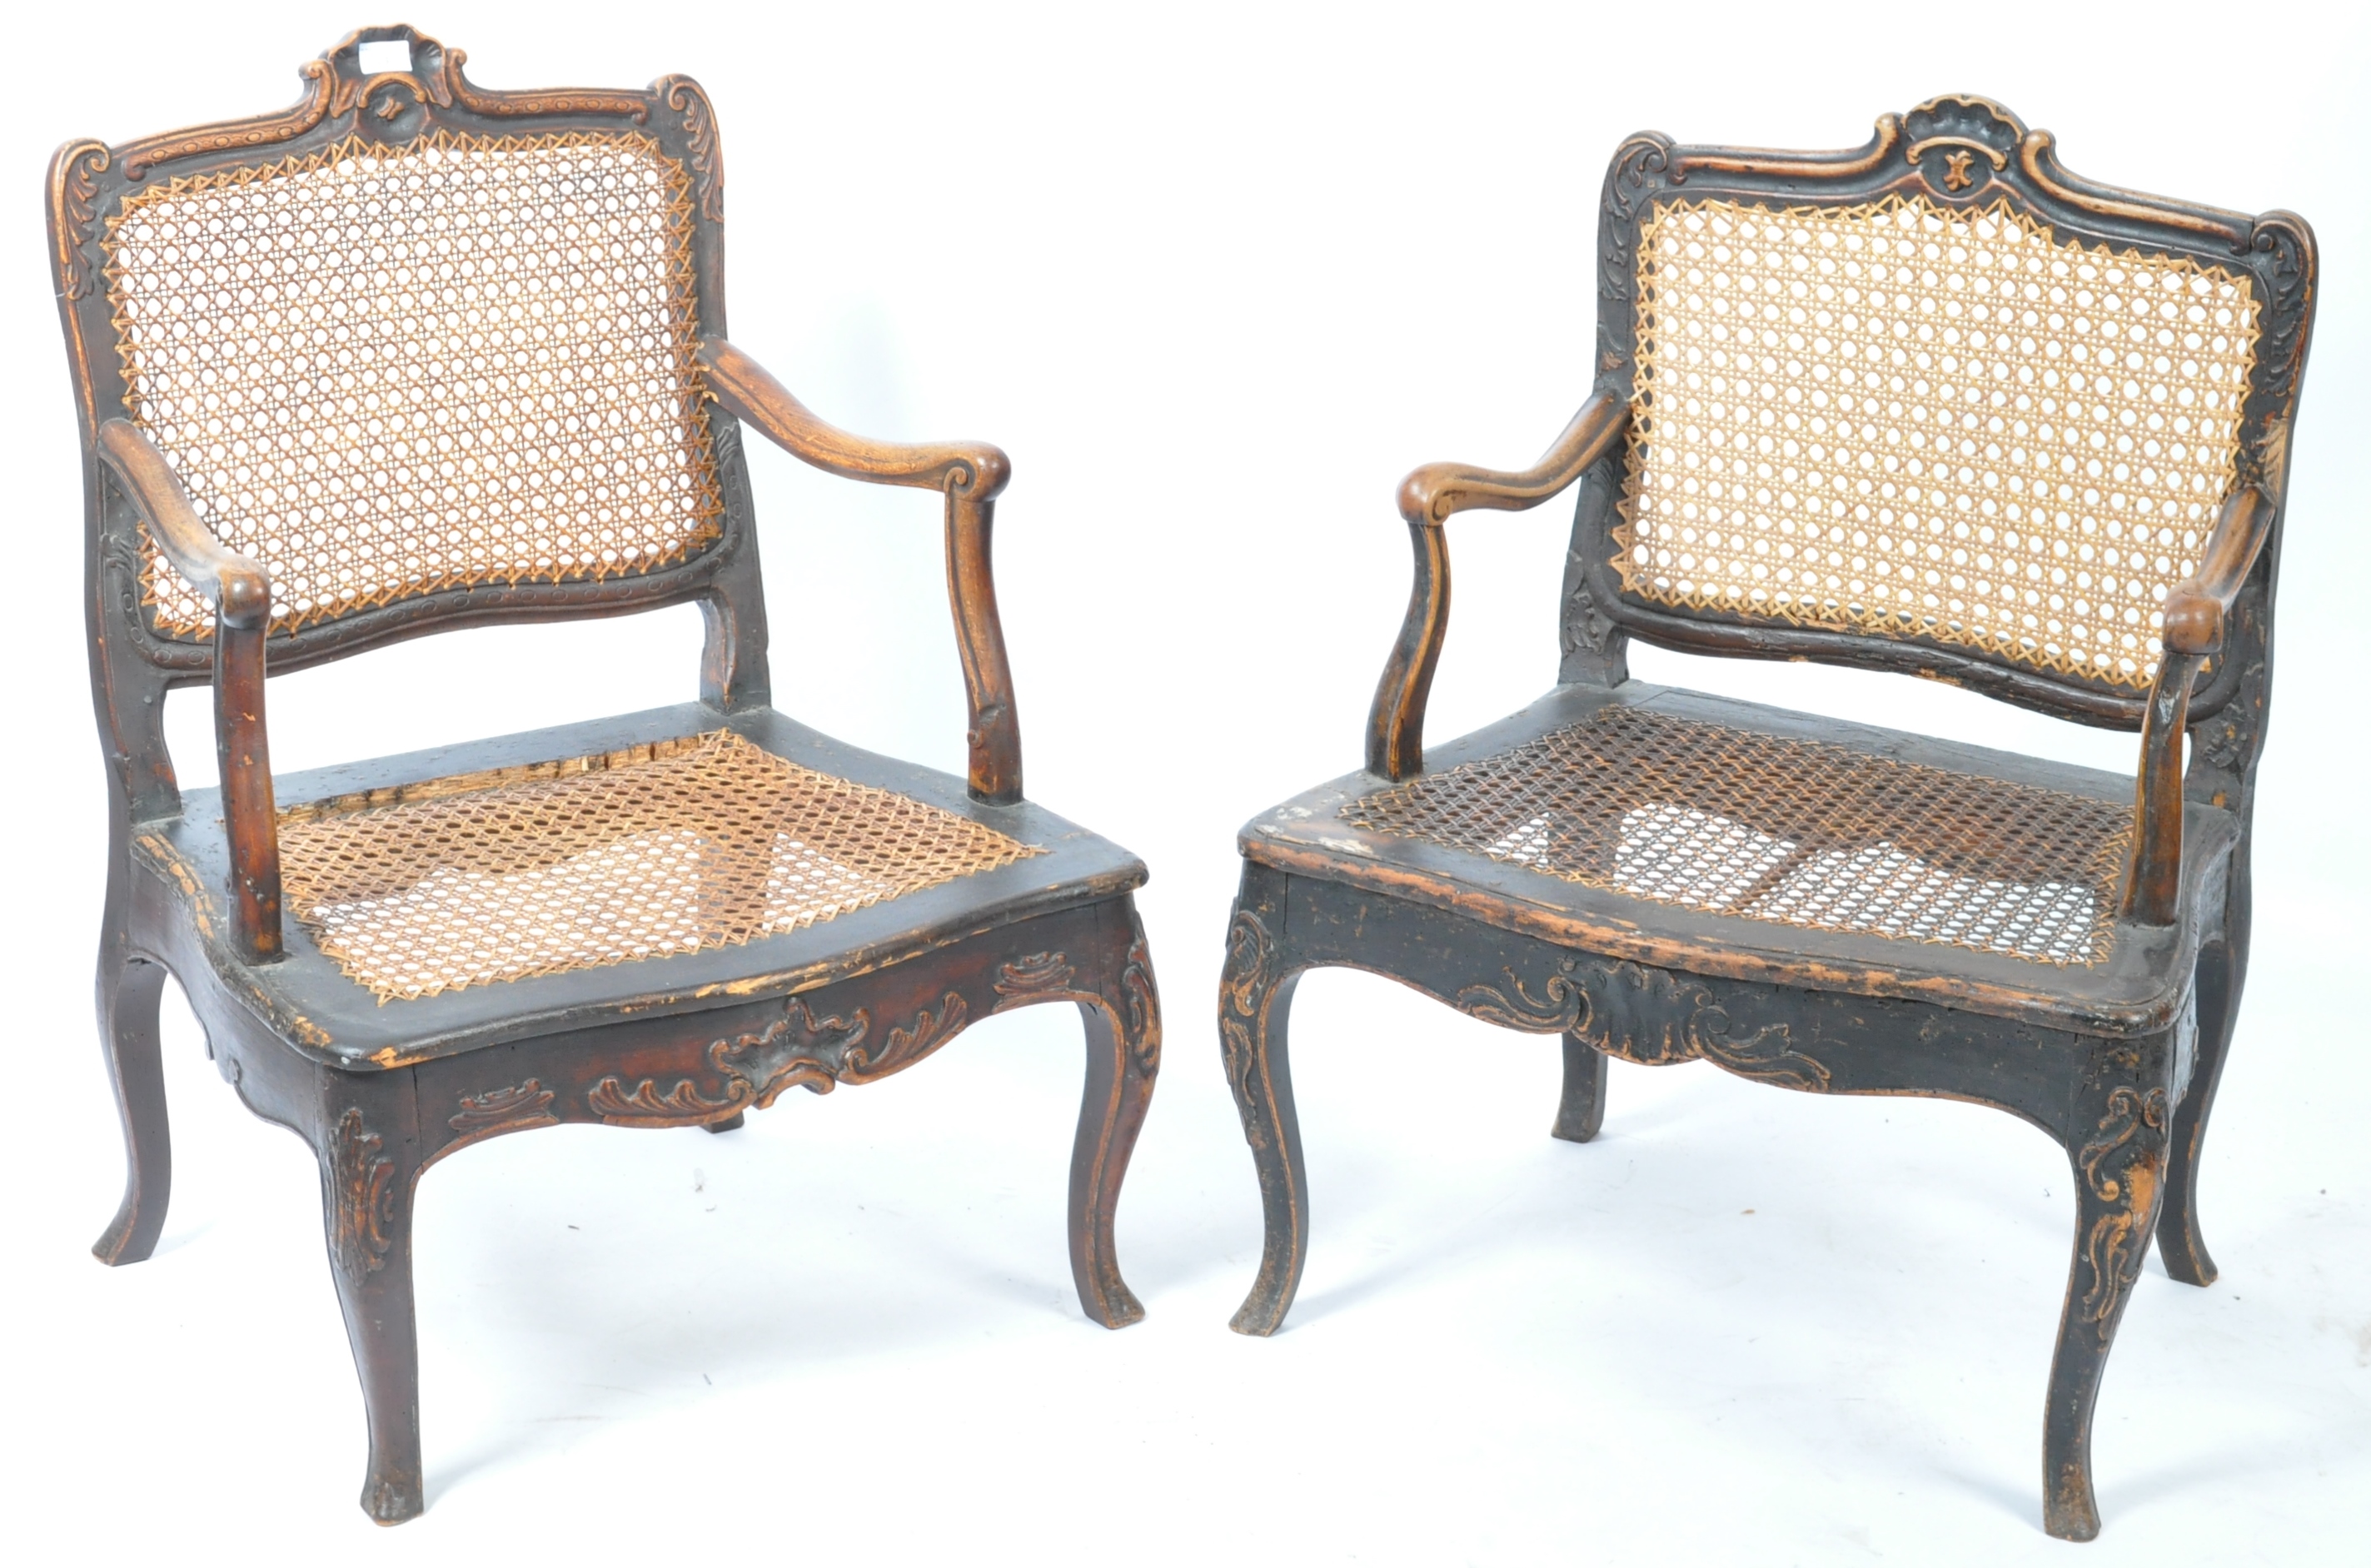 ANTIQUE PAIR OF 18TH CENTURY GEORGIAN CANE & WALNUT ELBOW CHAIRS - Image 2 of 9